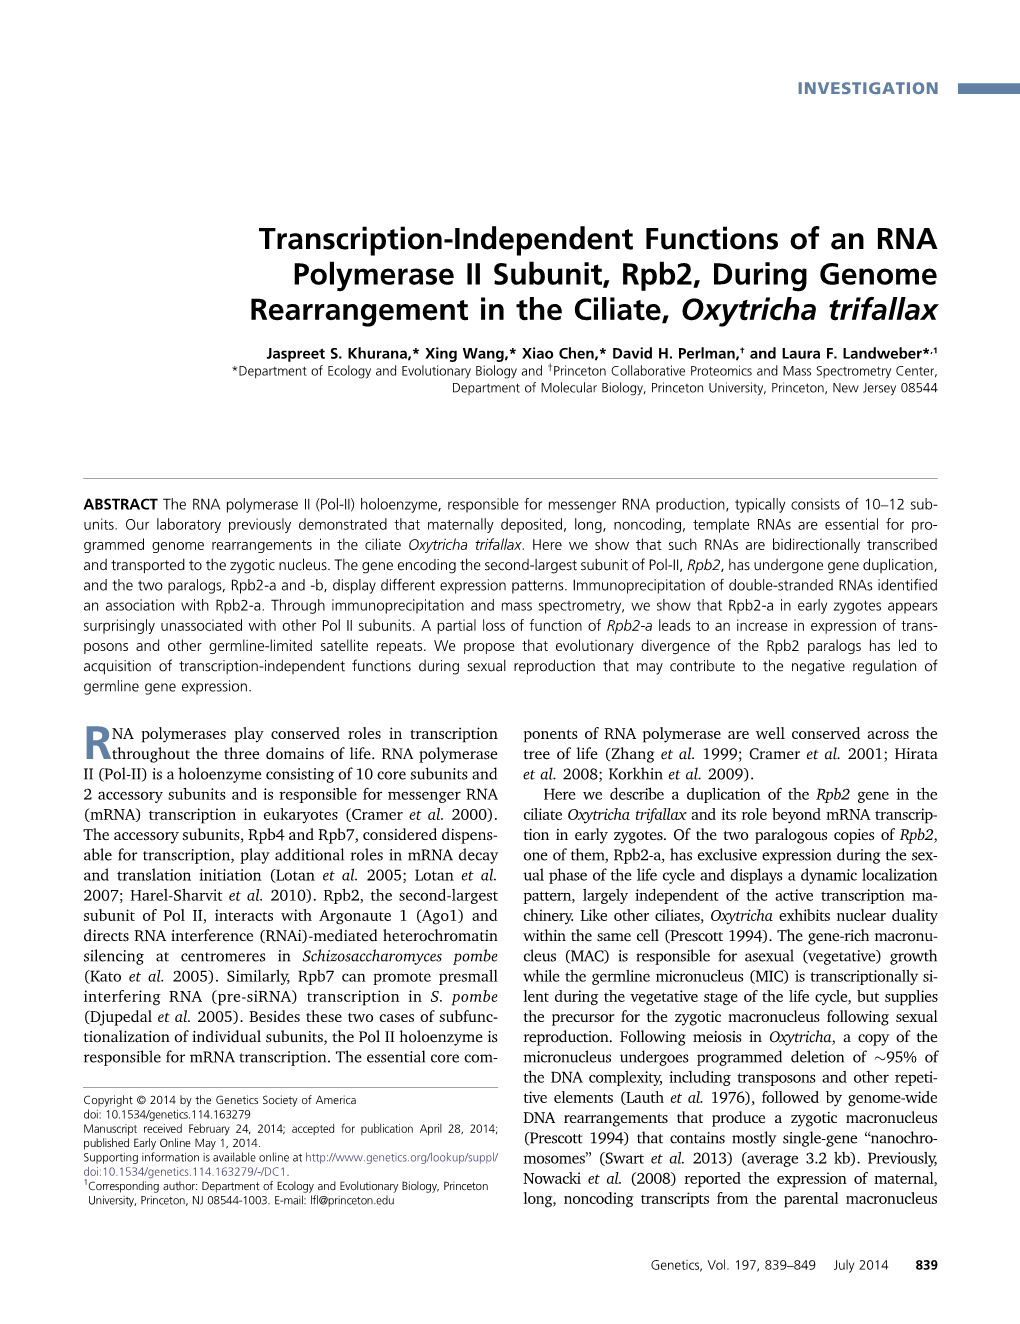 Transcription-Independent Functions of an RNA Polymerase II Subunit, Rpb2, During Genome Rearrangement in the Ciliate, Oxytricha Trifallax